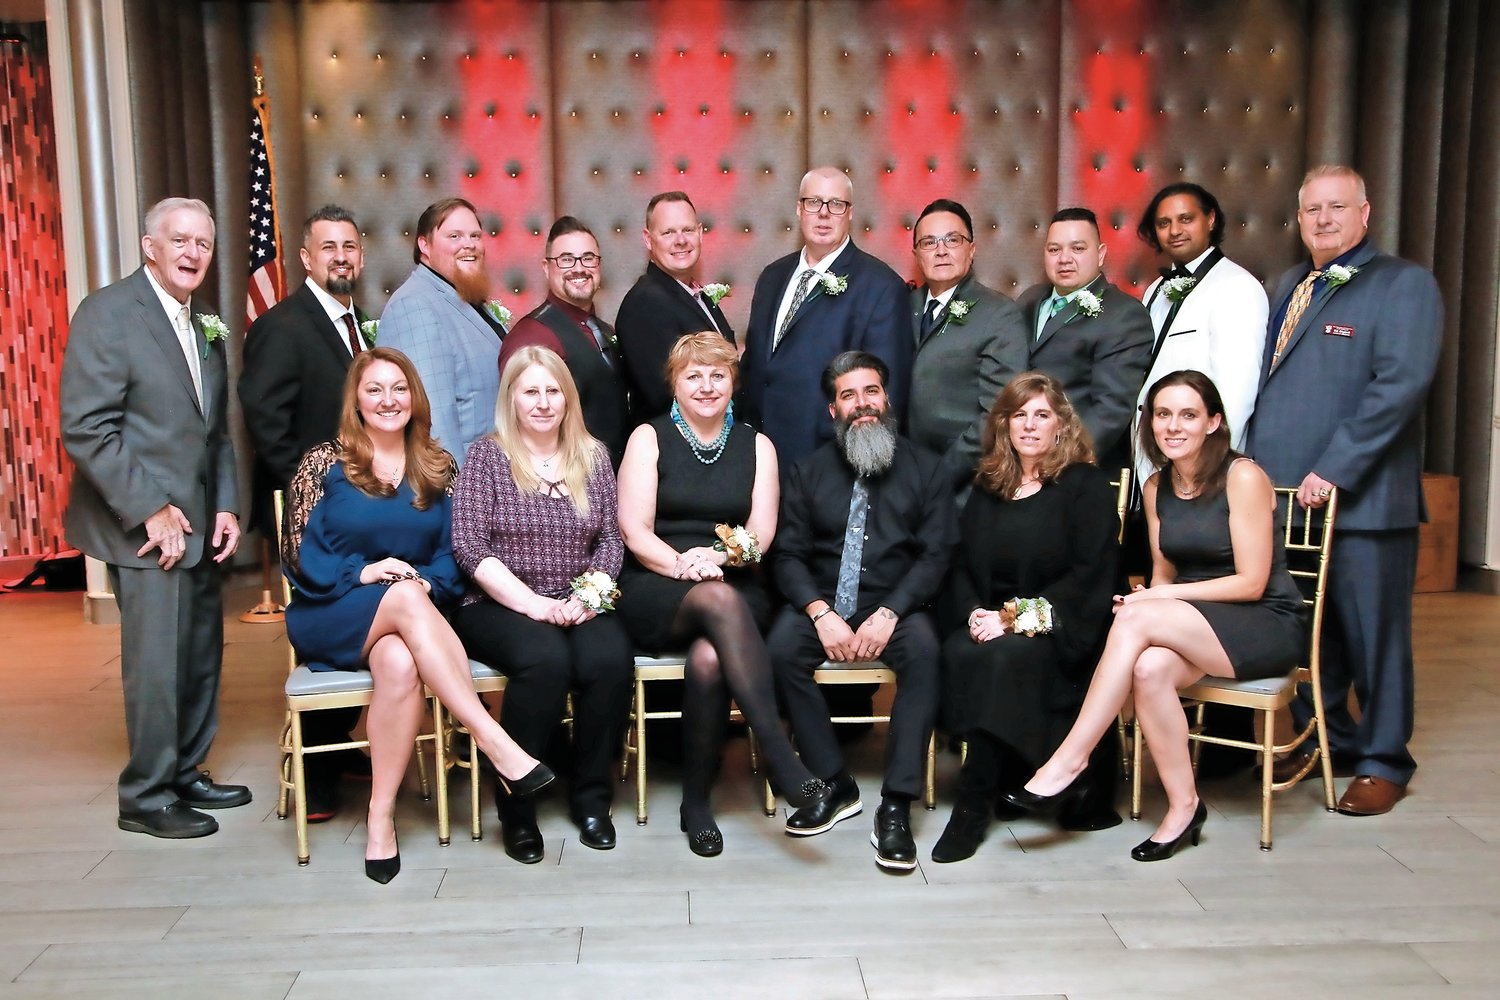 The 2020 Chamber of Commerce of the Bellmores’ Board of Directors.